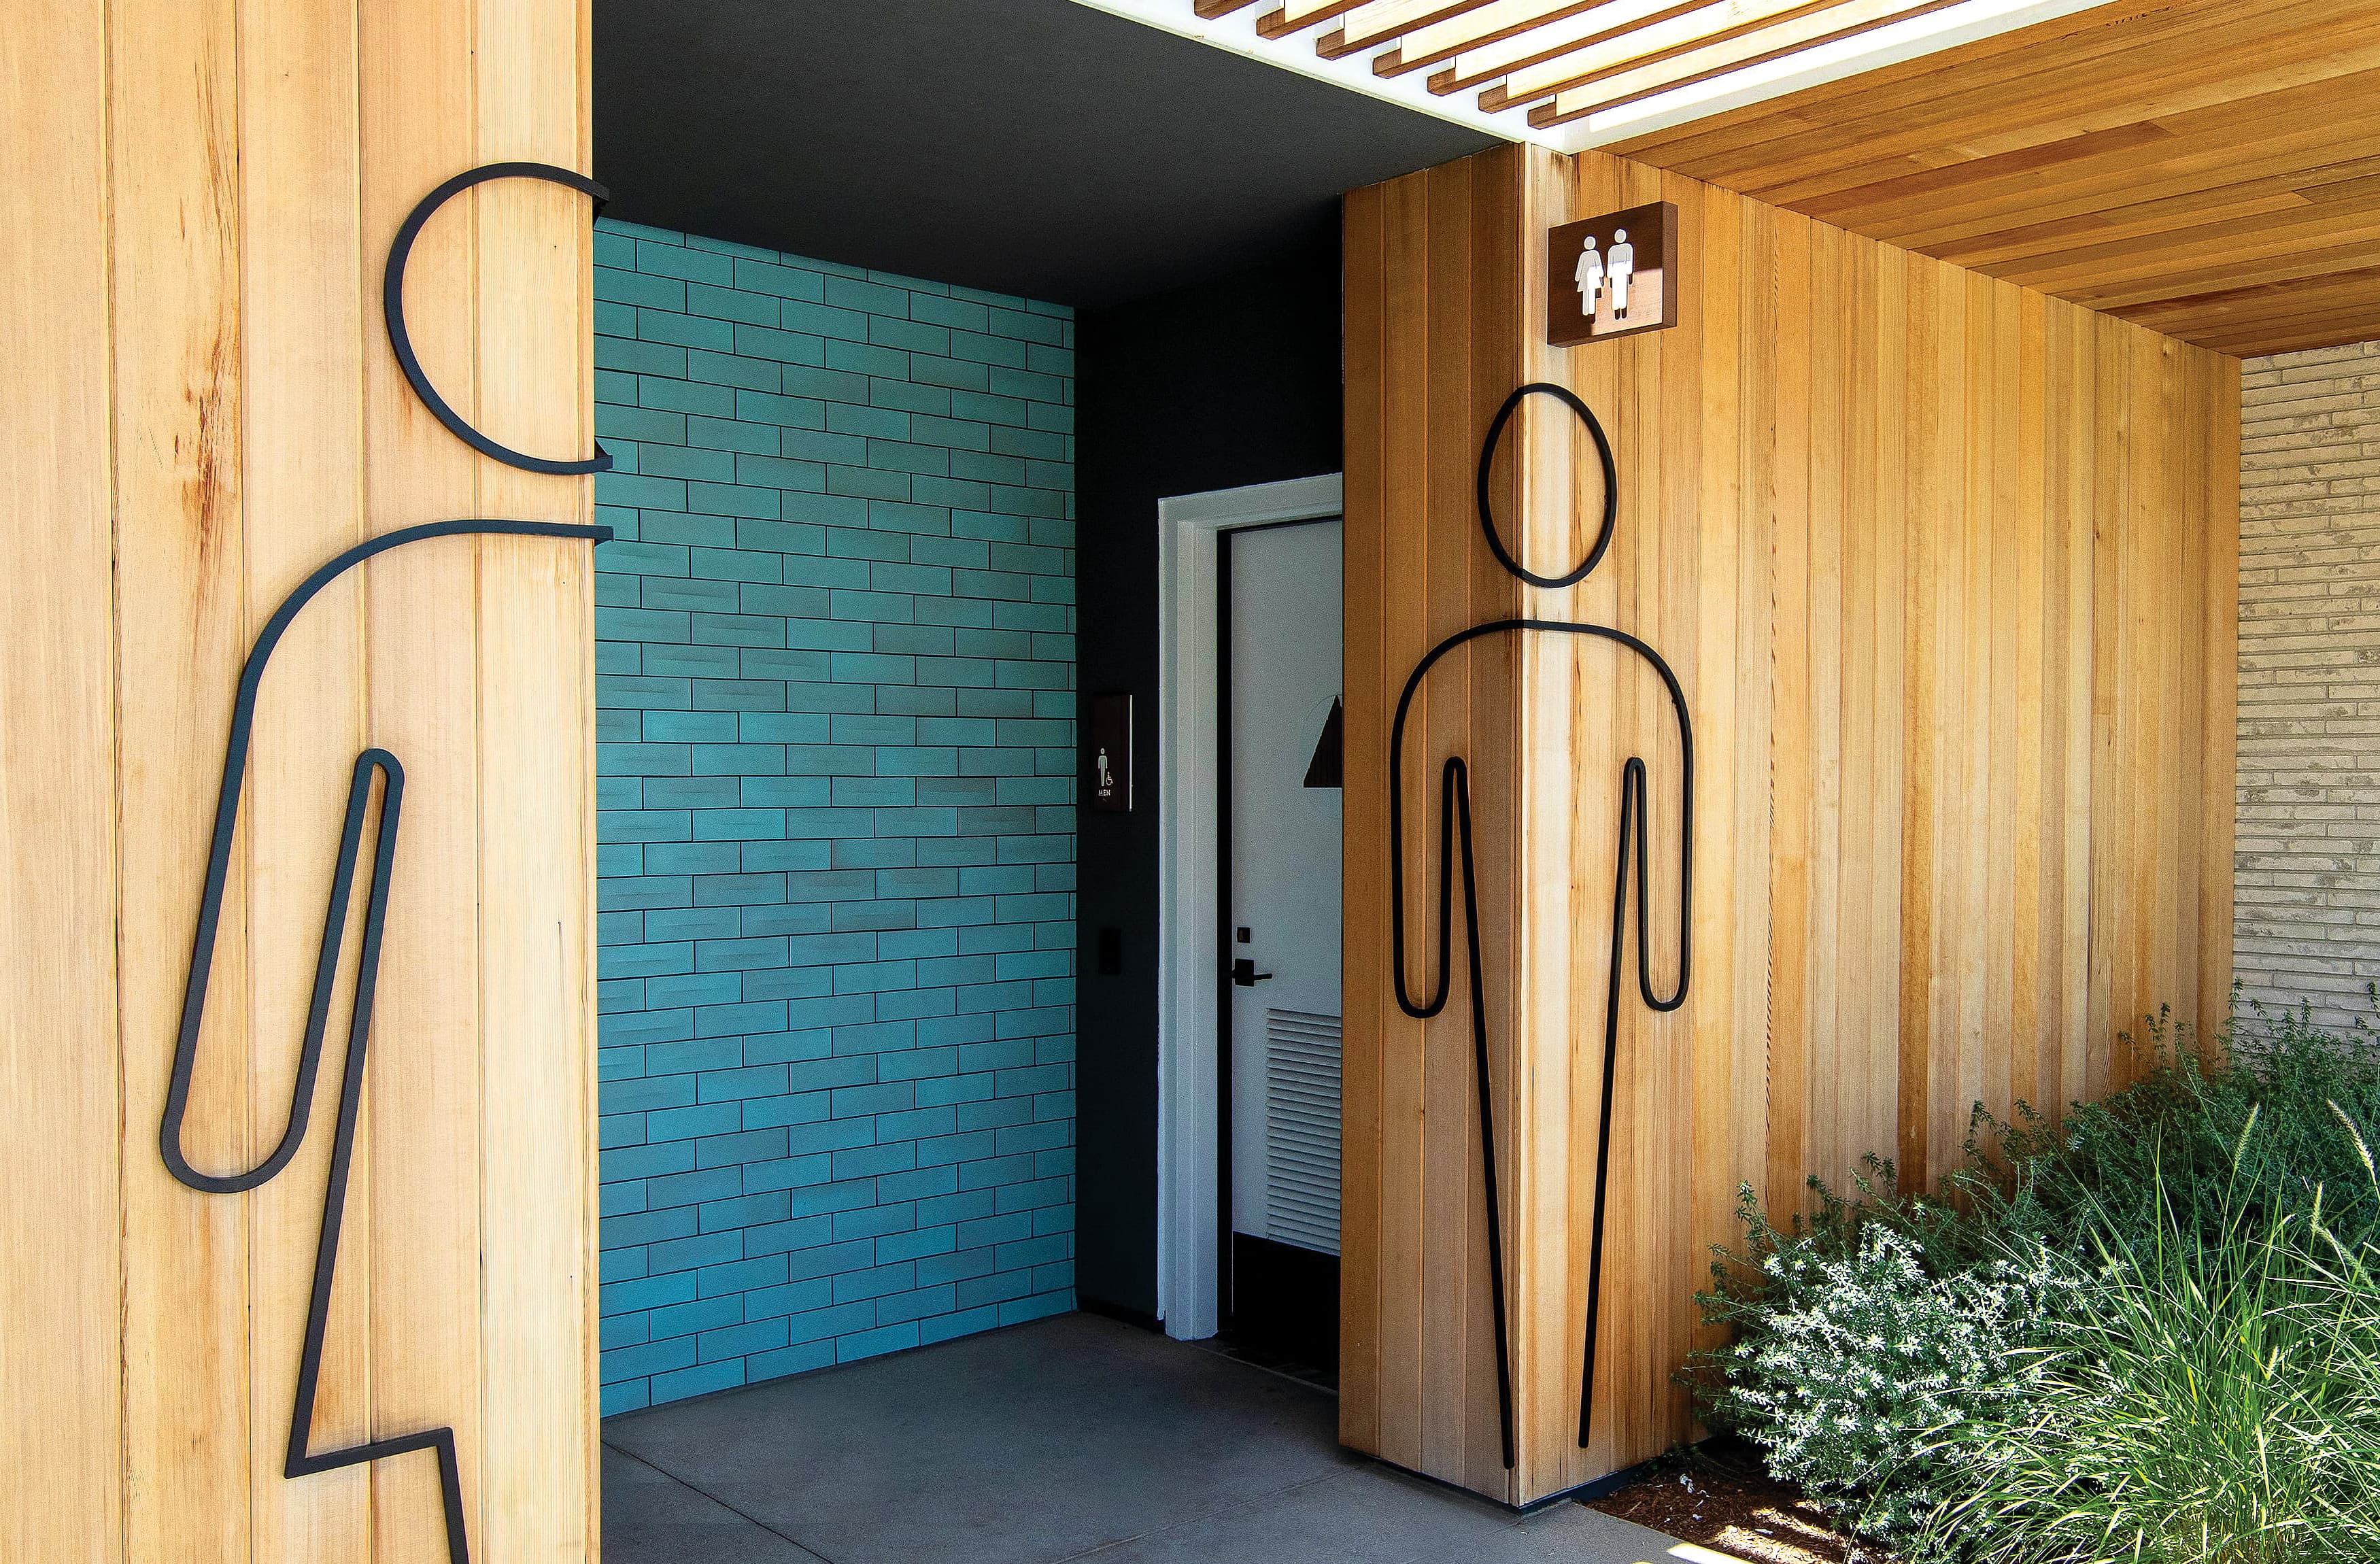 Wooden outlined restroom core identity at Rise Park in Irvine, California.